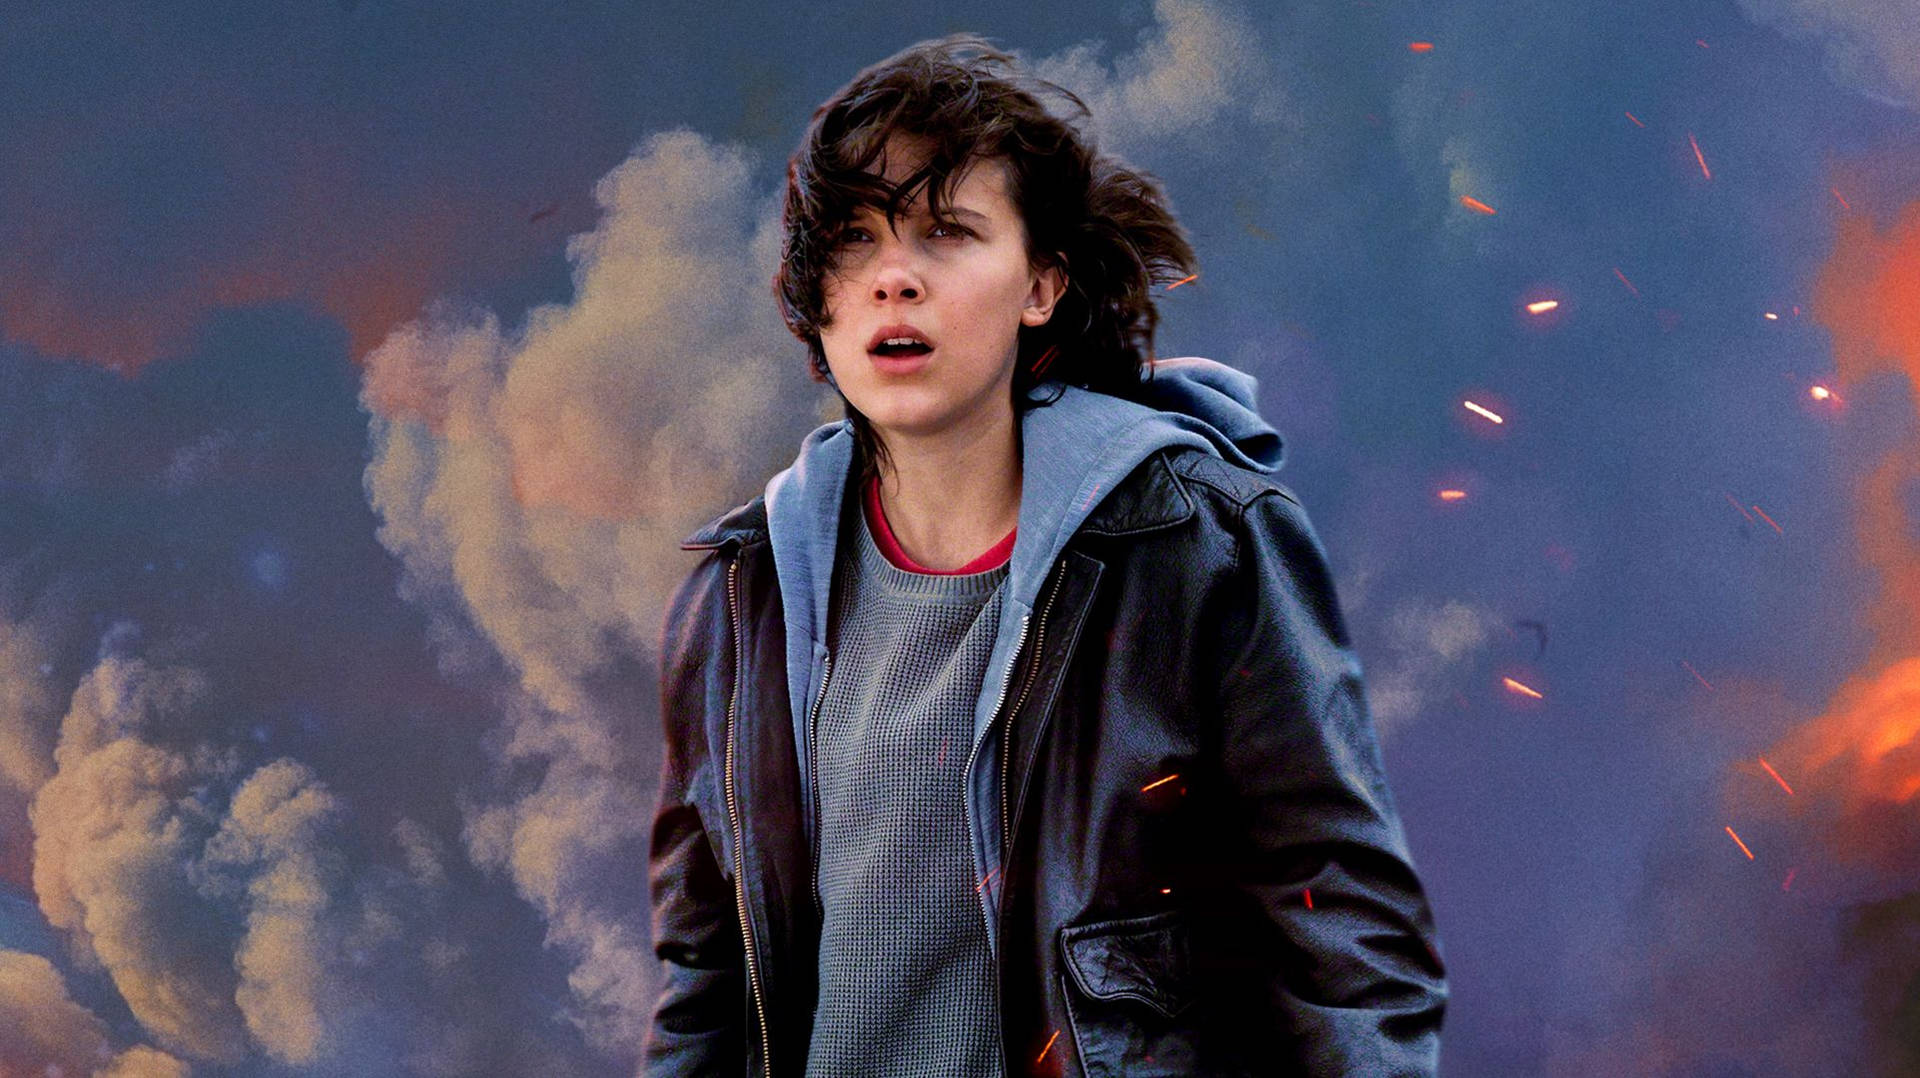 Millie Bobby Brown in Godzilla: King of the Monsters Wallpaper